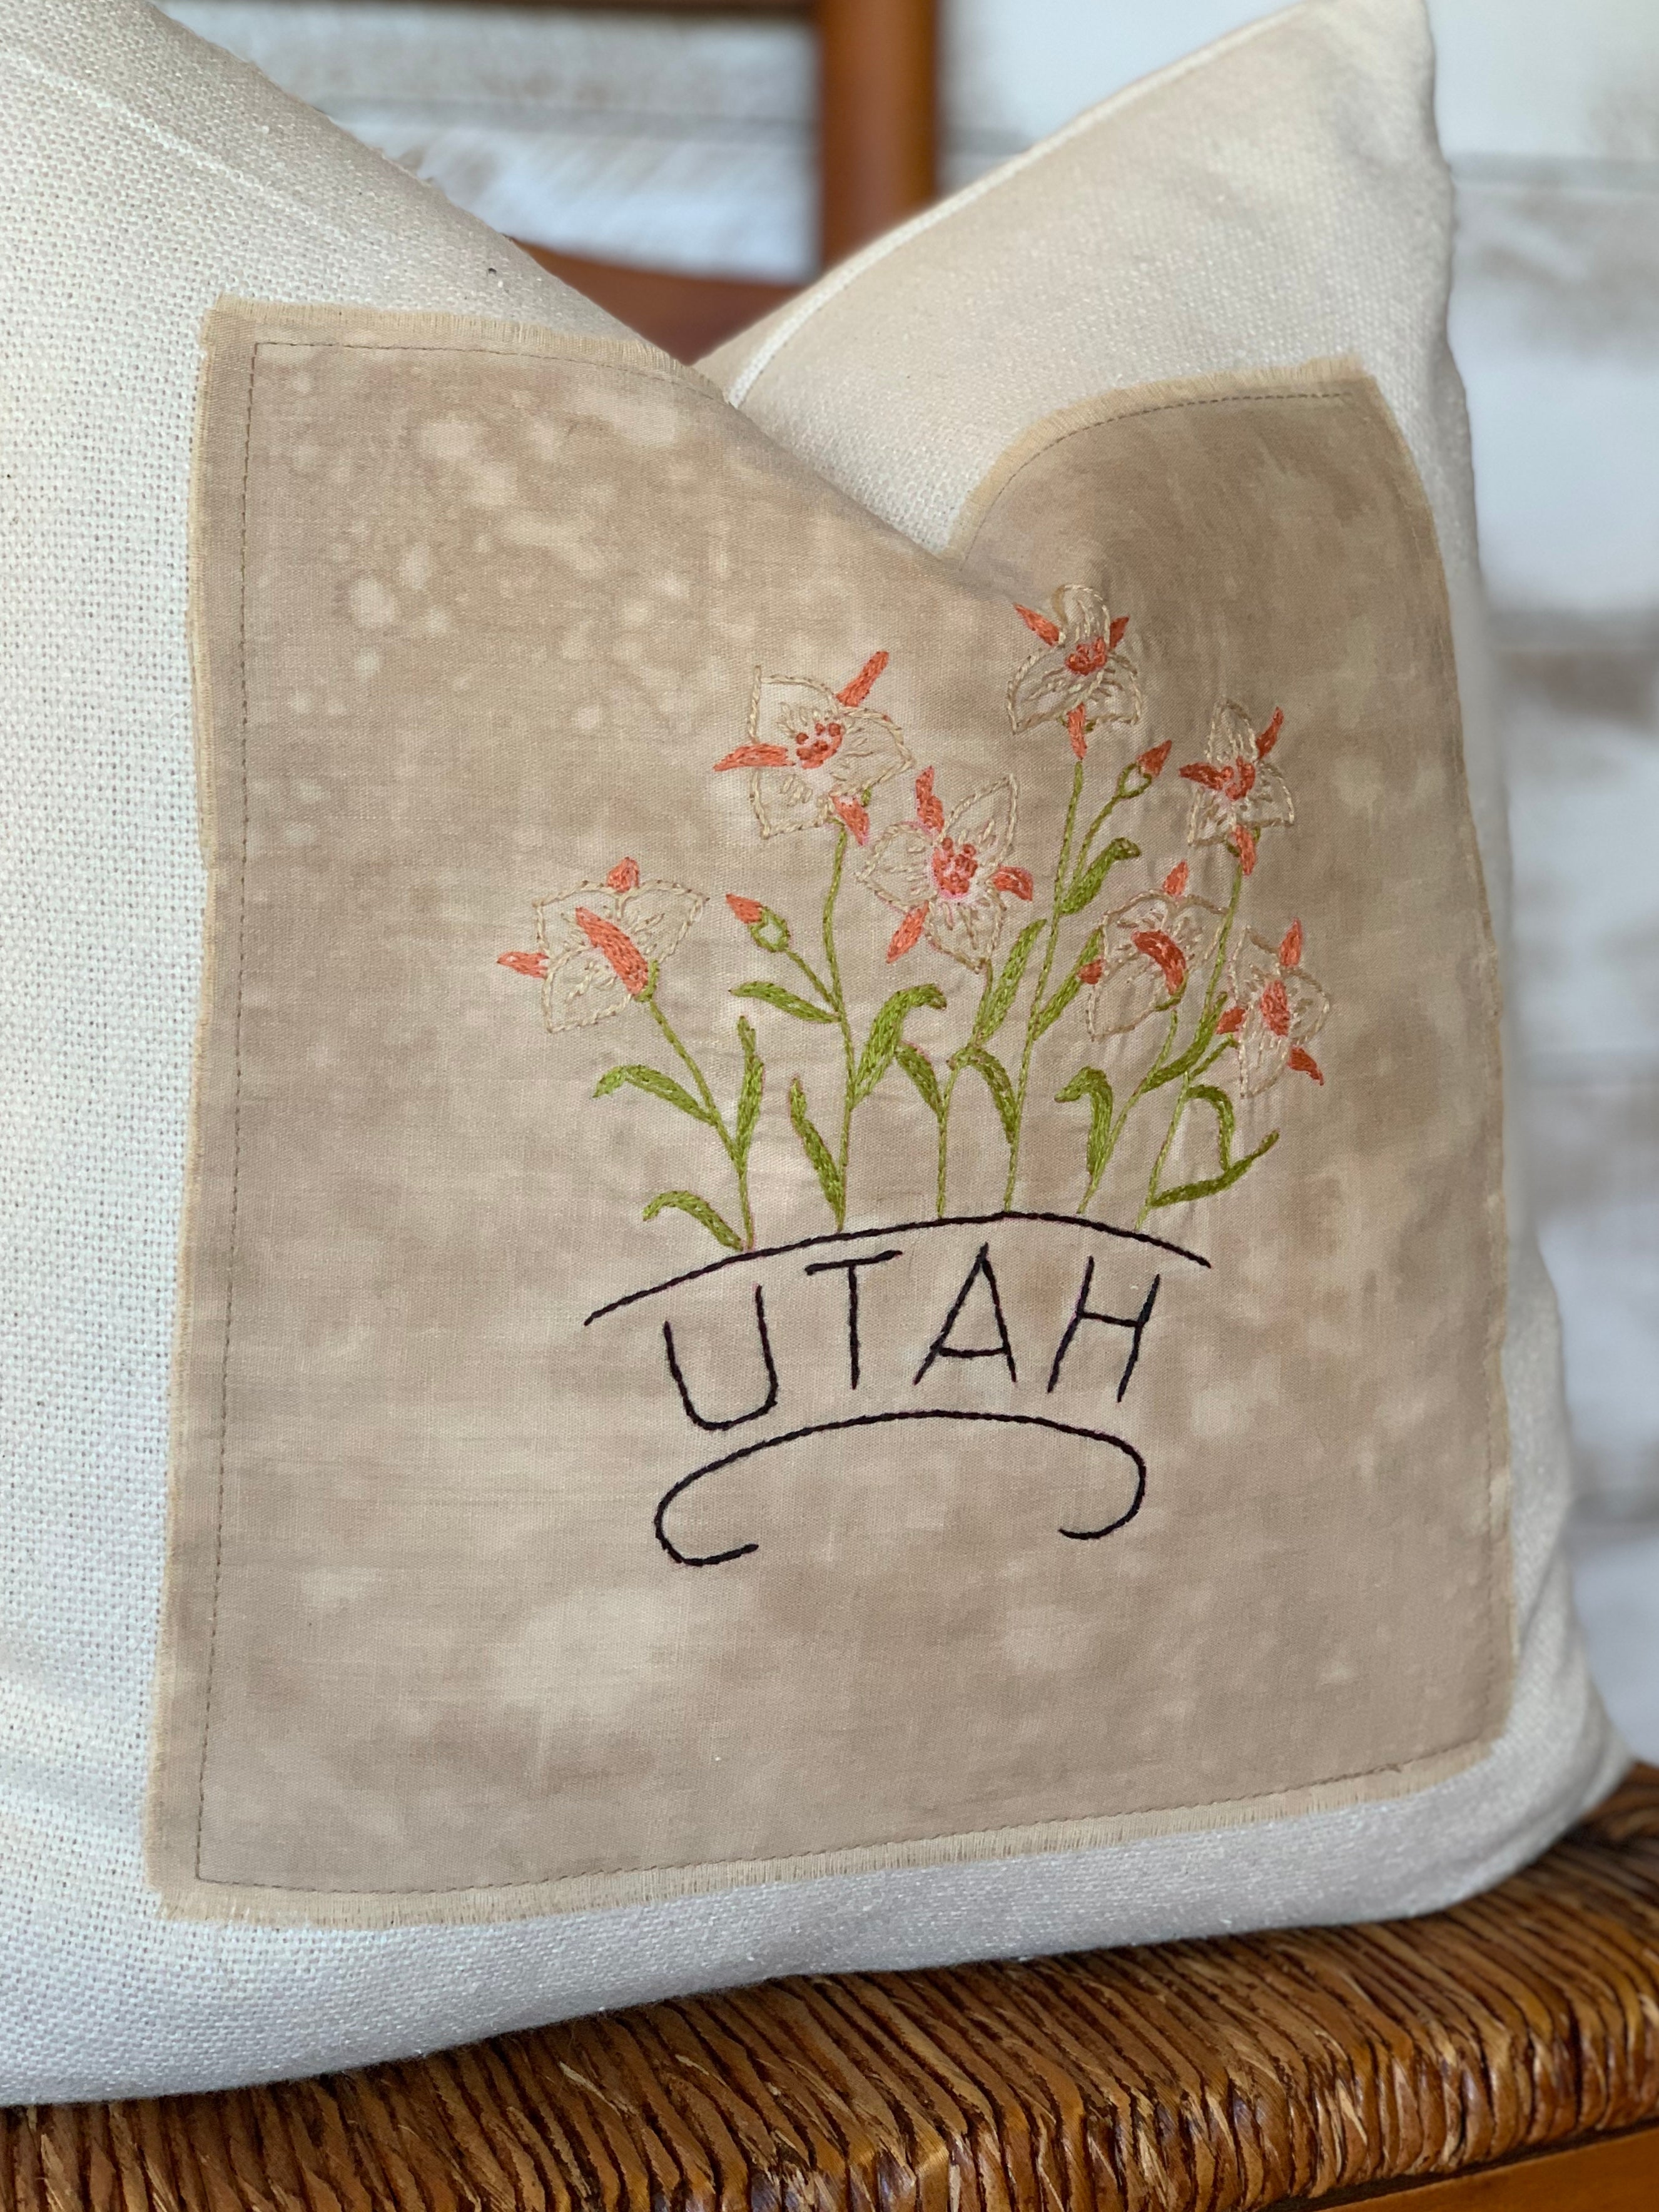 Utah State Pillow - Embroidered